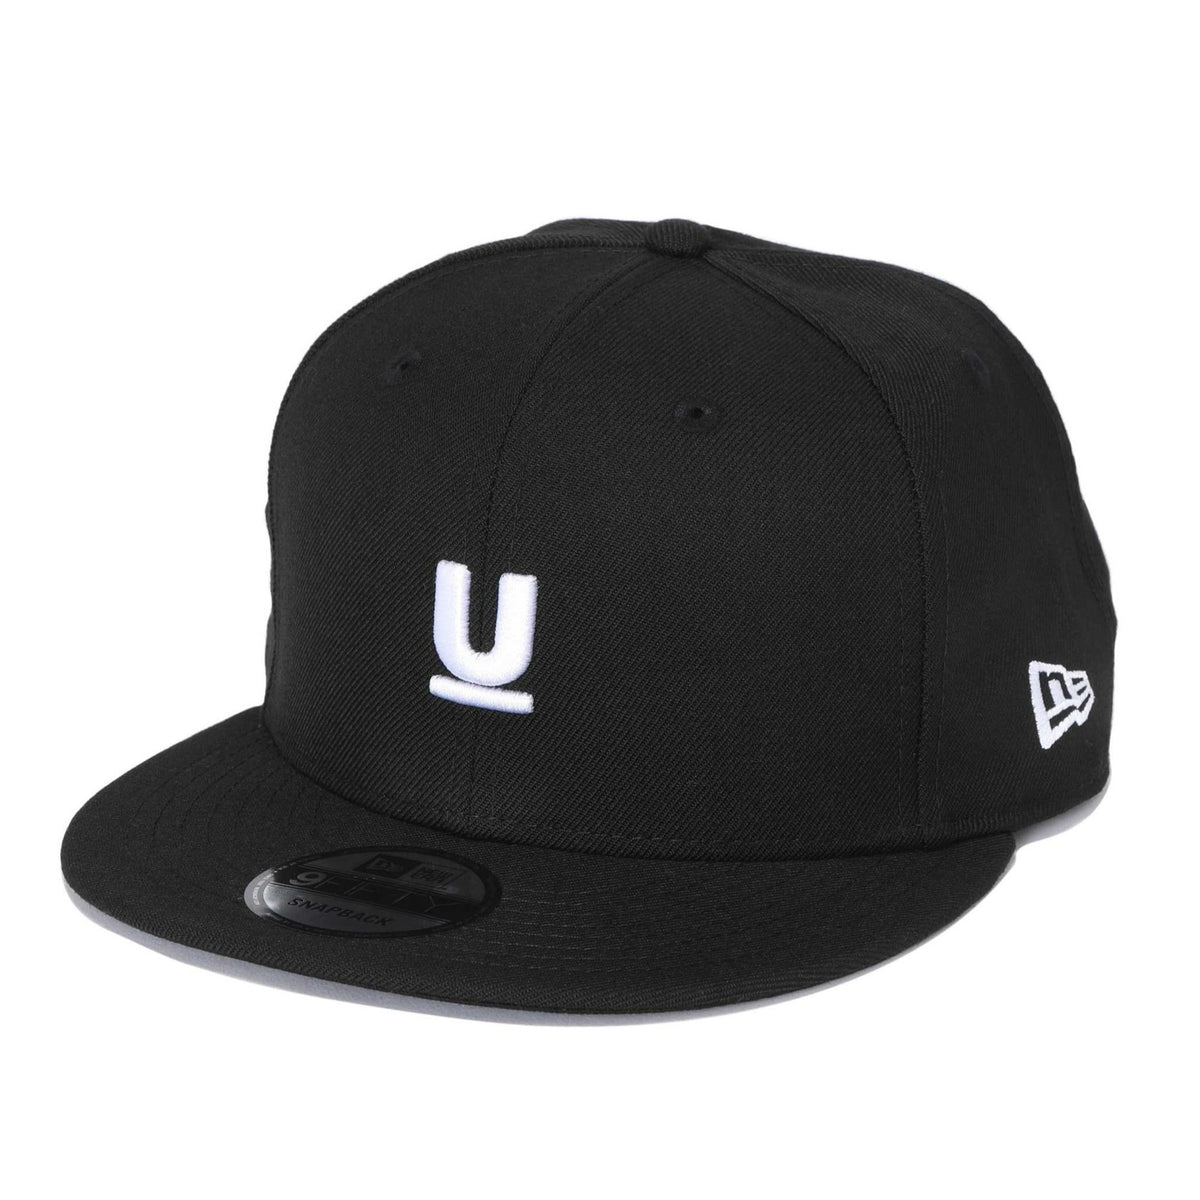 UNDERCOVER MADSTORE x NEW ERA 9FIFTY